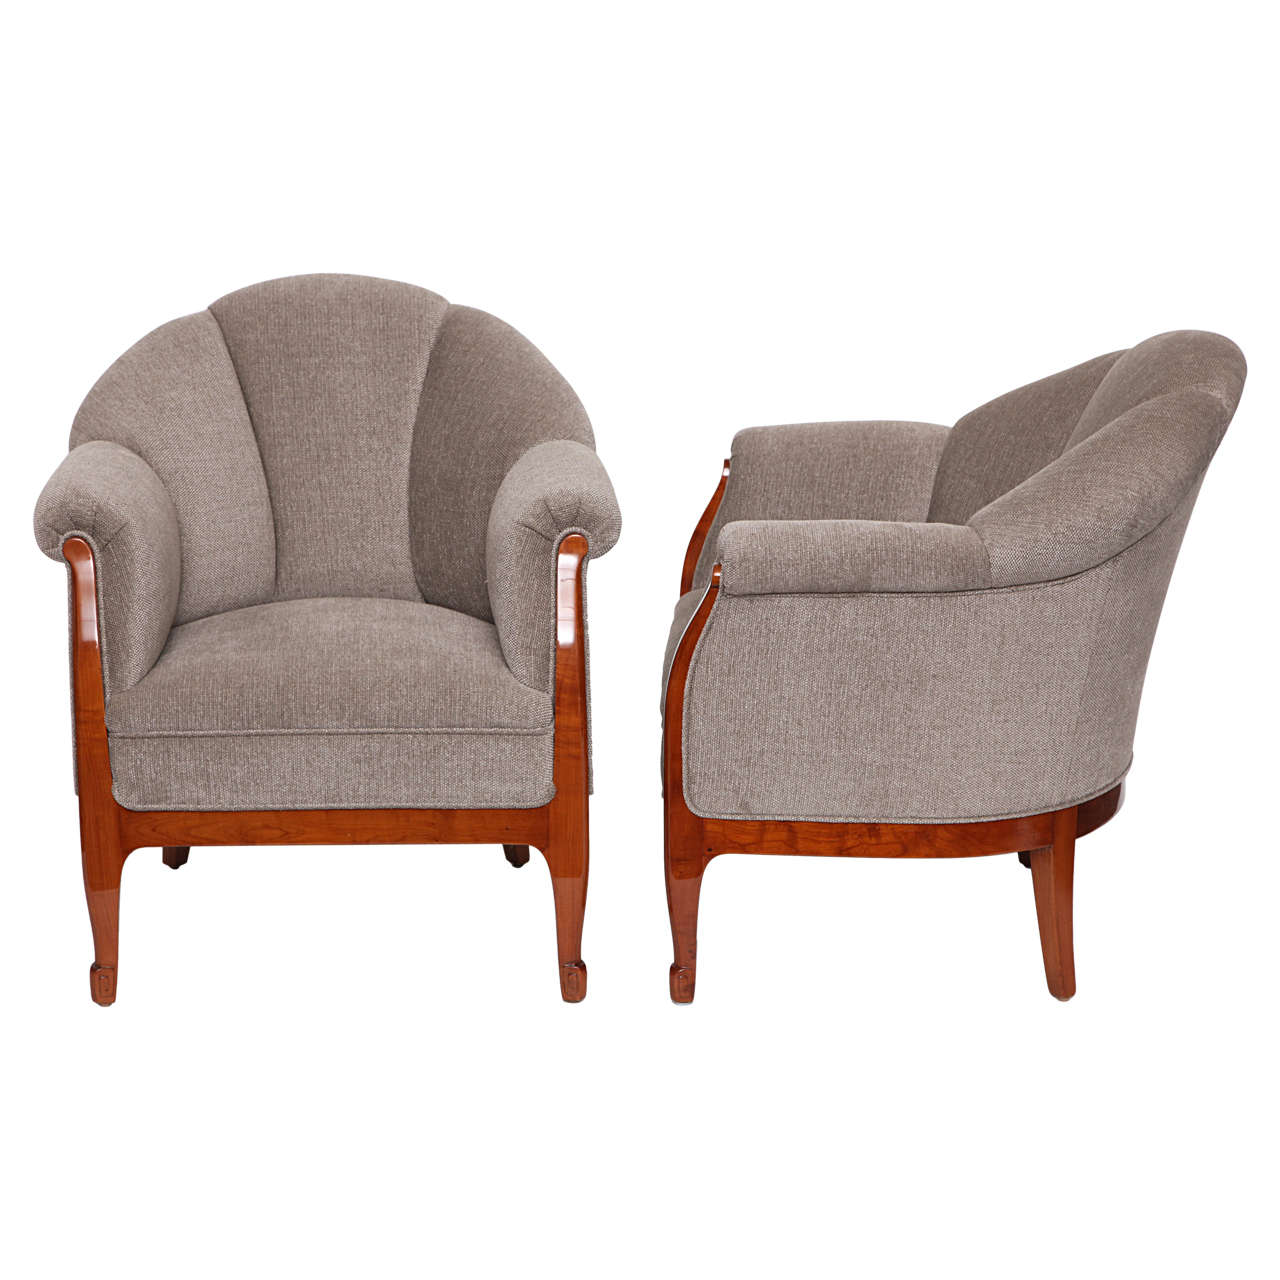 Pair of Fine and Rare Pearwood Armchairs by Louis Süe